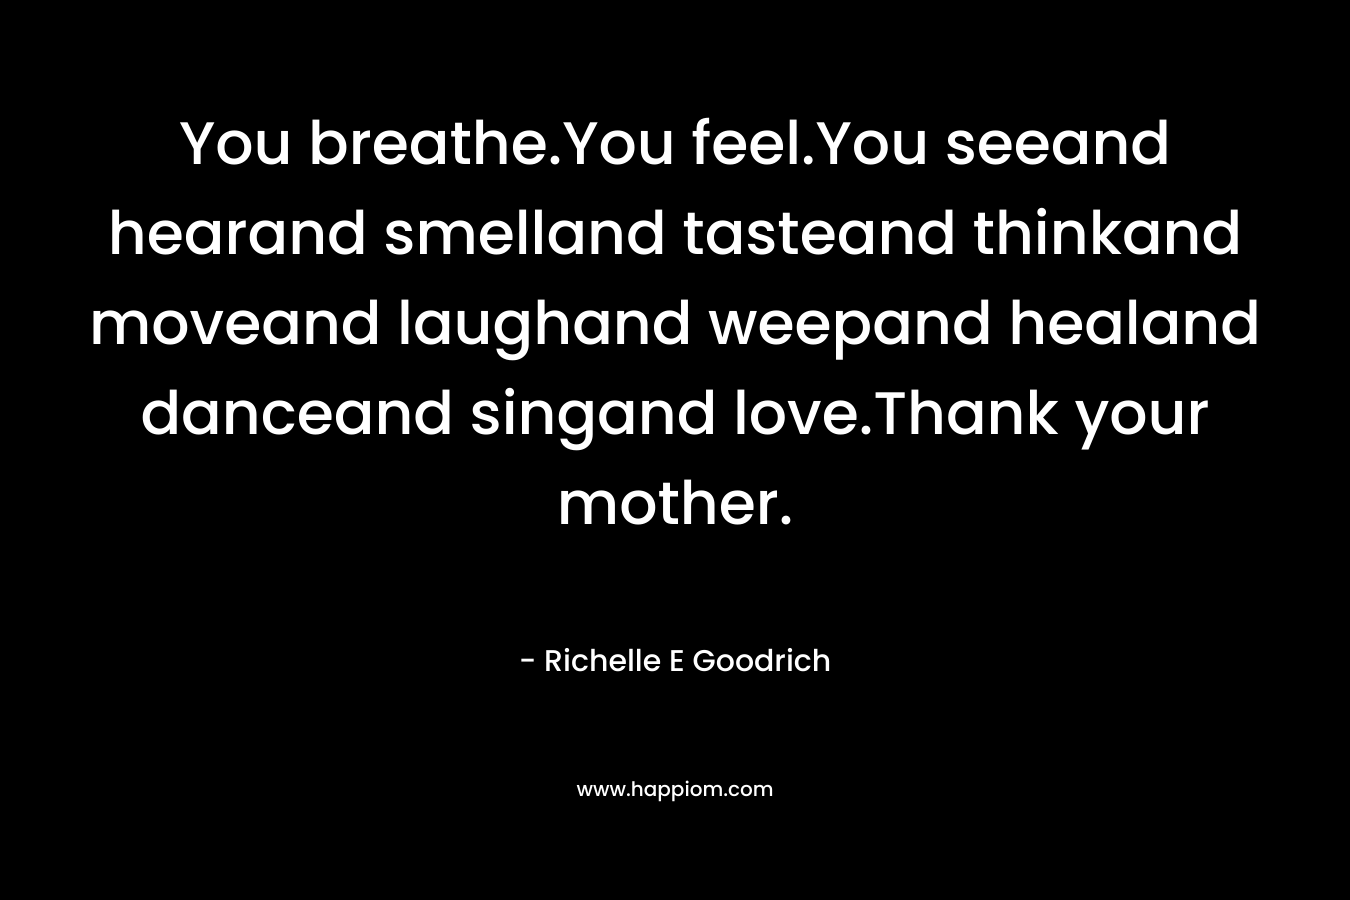 You breathe.You feel.You seeand hearand smelland tasteand thinkand moveand laughand weepand healand danceand singand love.Thank your mother. – Richelle E Goodrich